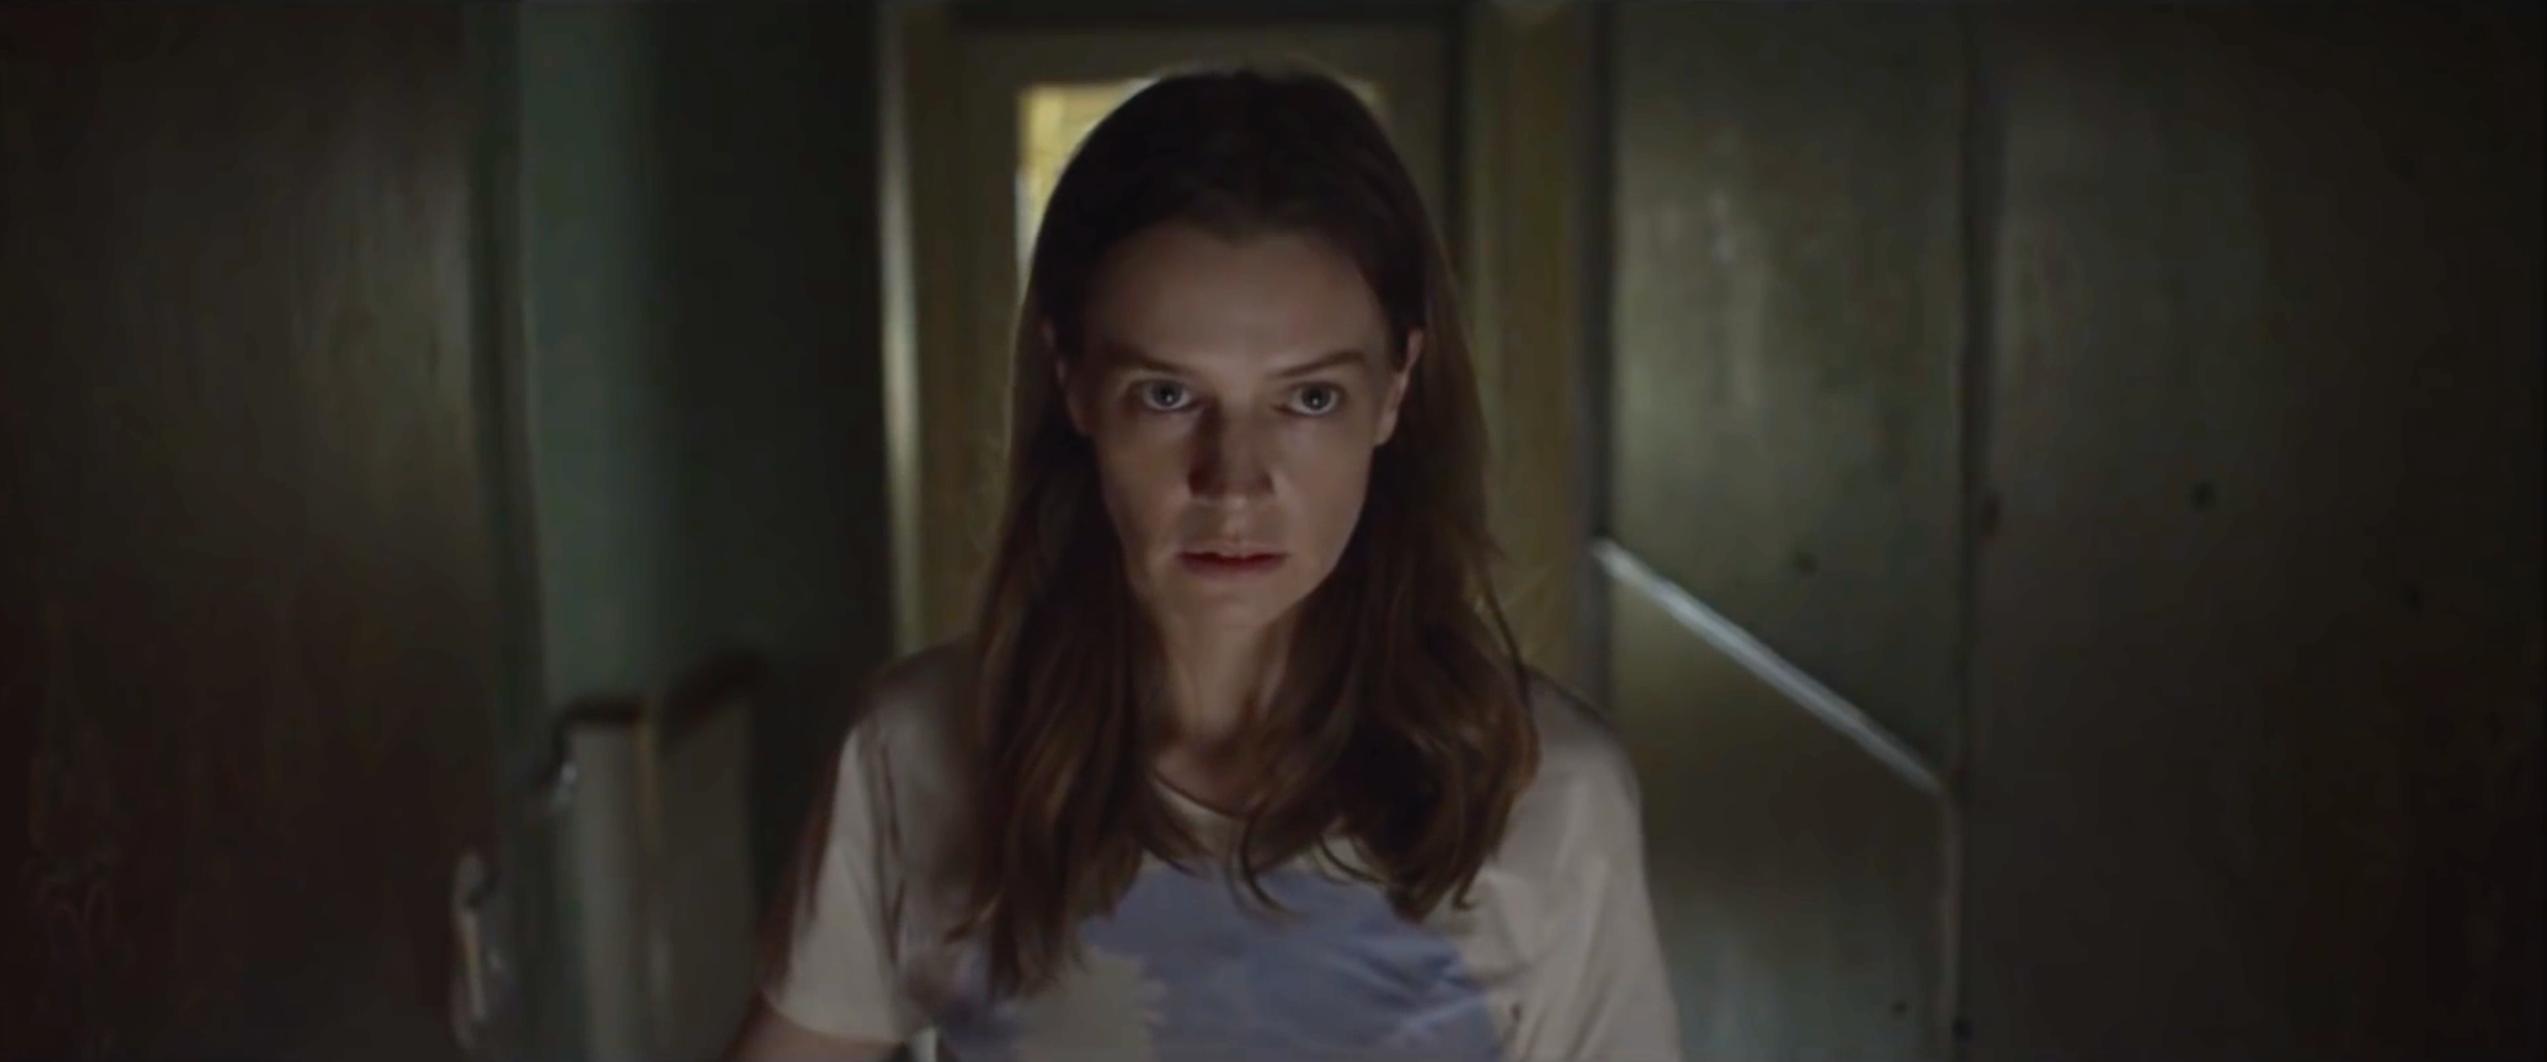 Further Review of A Dark Song-An Enduring Occult Blossoms to Forgiveness